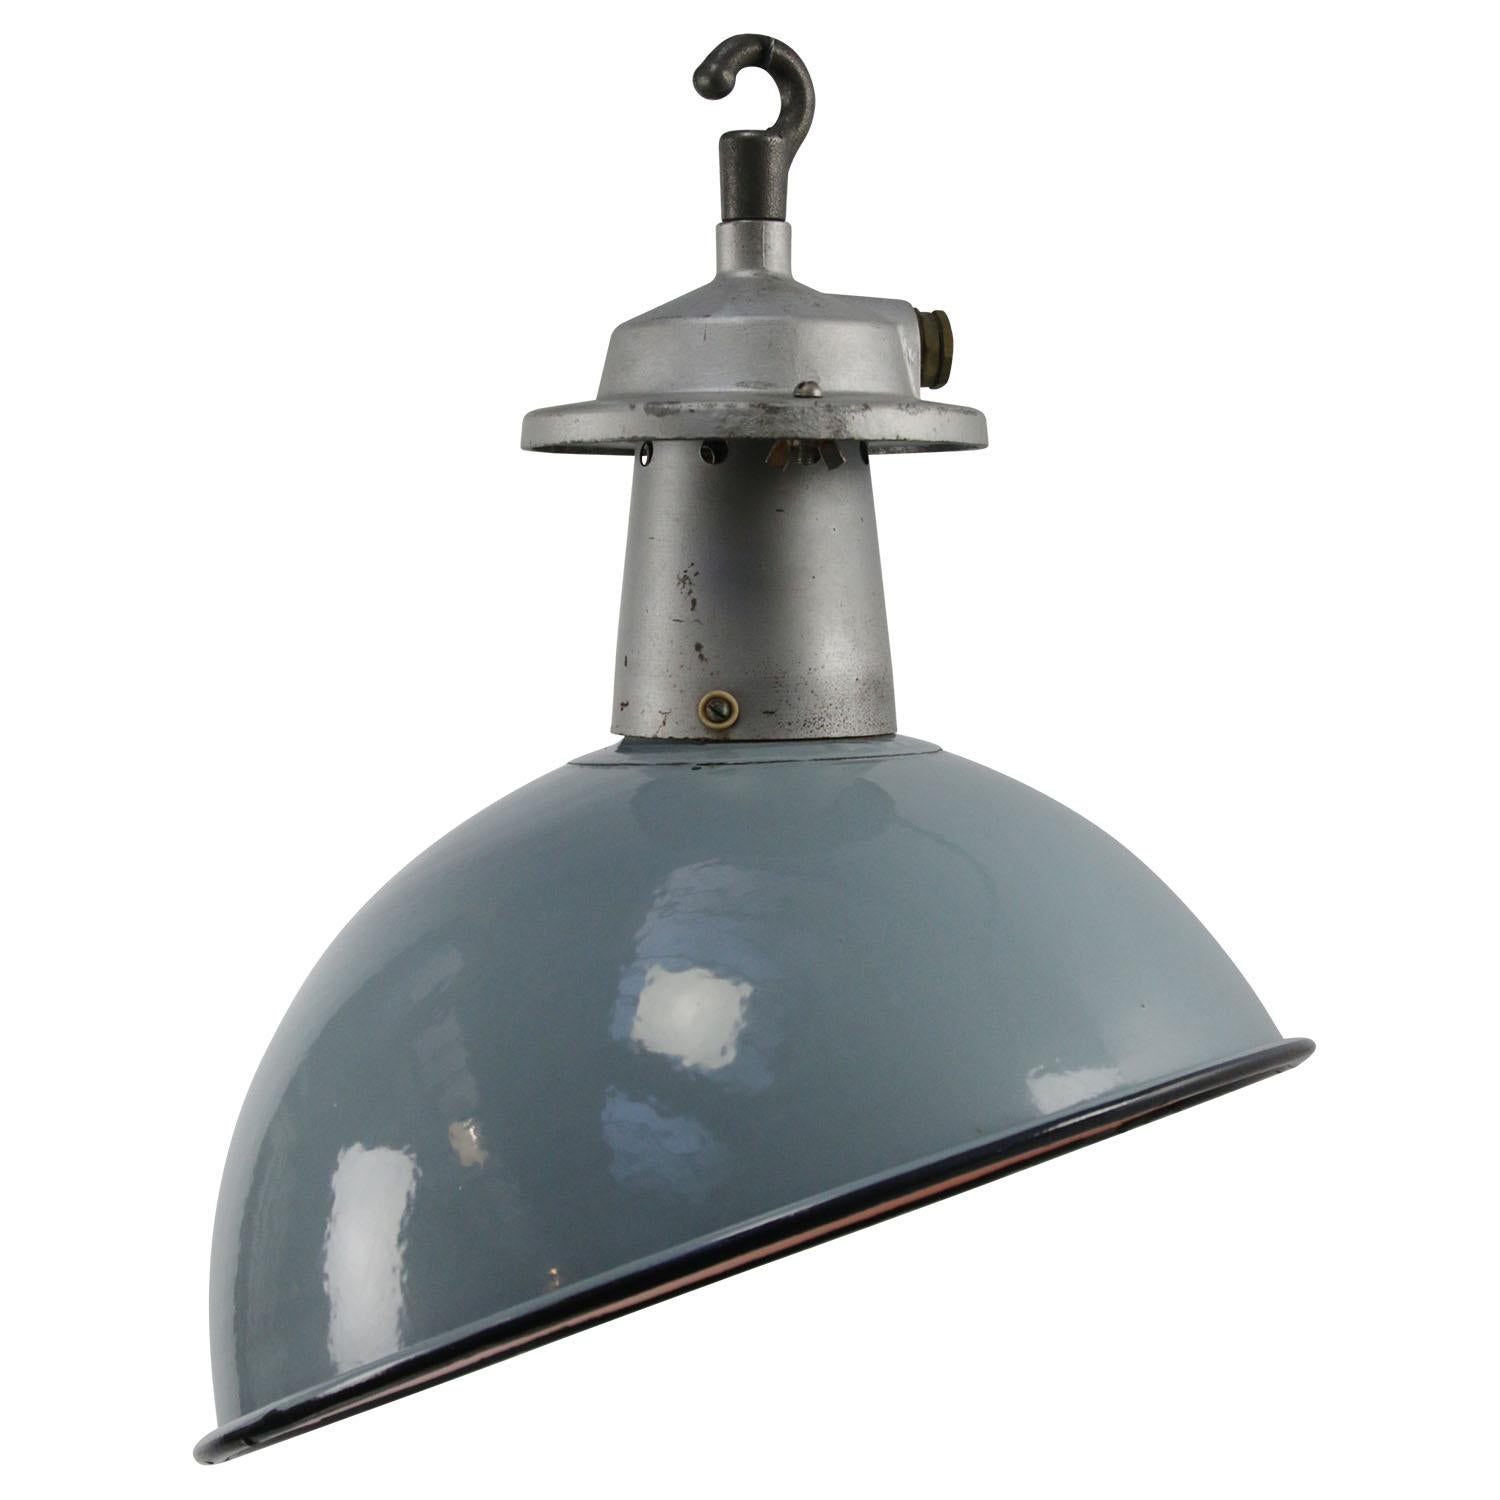 British Asymmetrical grey industrial pendant
Grey enamel with cast aluminium top.
Rare model used in warehouses and factories

Weight: 2.00 kg / 4.4 lb.

Priced per individual item. All lamps have been made suitable by international standards